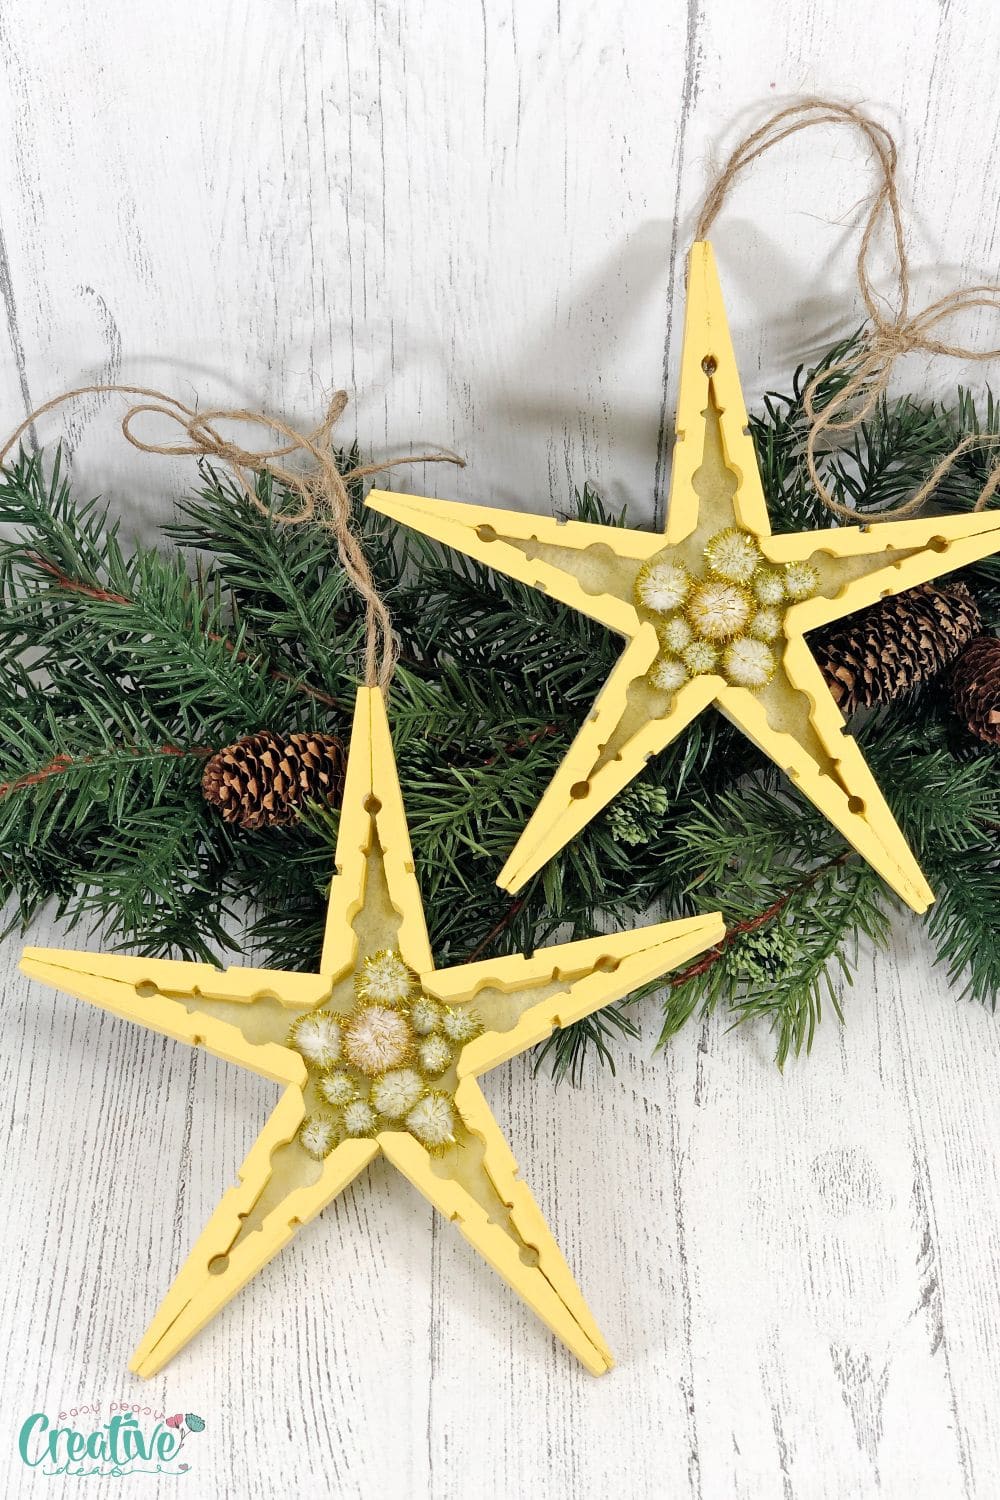 Clothespin star ornaments